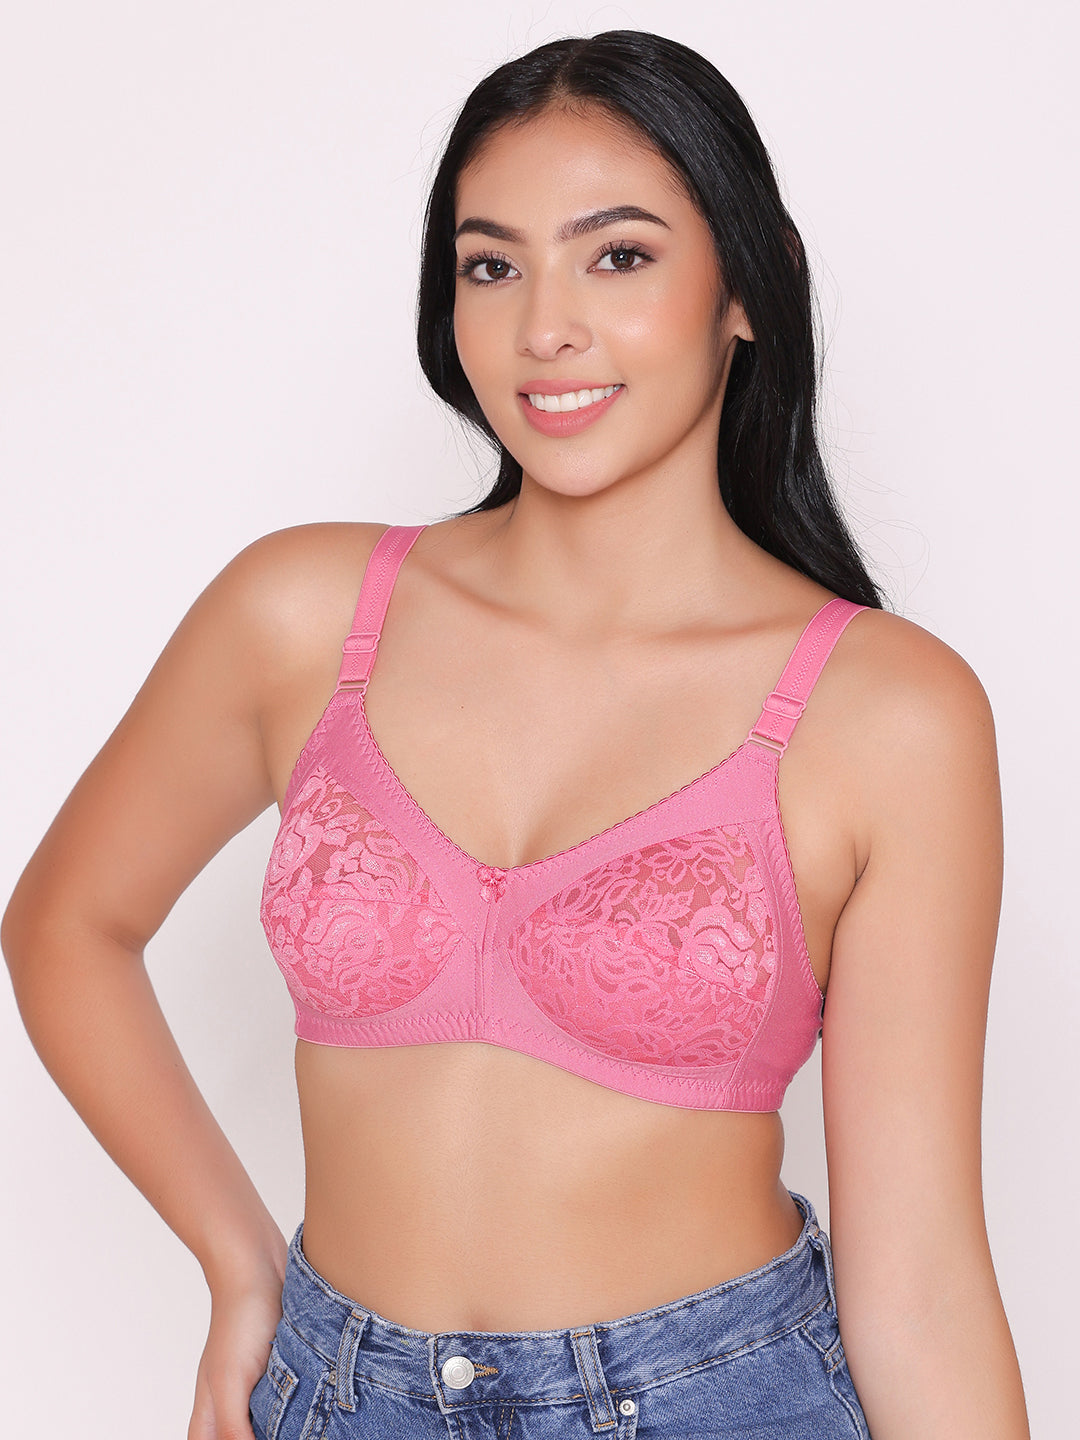 Buy Amifit RITIKA Bra Non Padded Full Coverage Cotton Bra for Women Color  White (B, 30) at